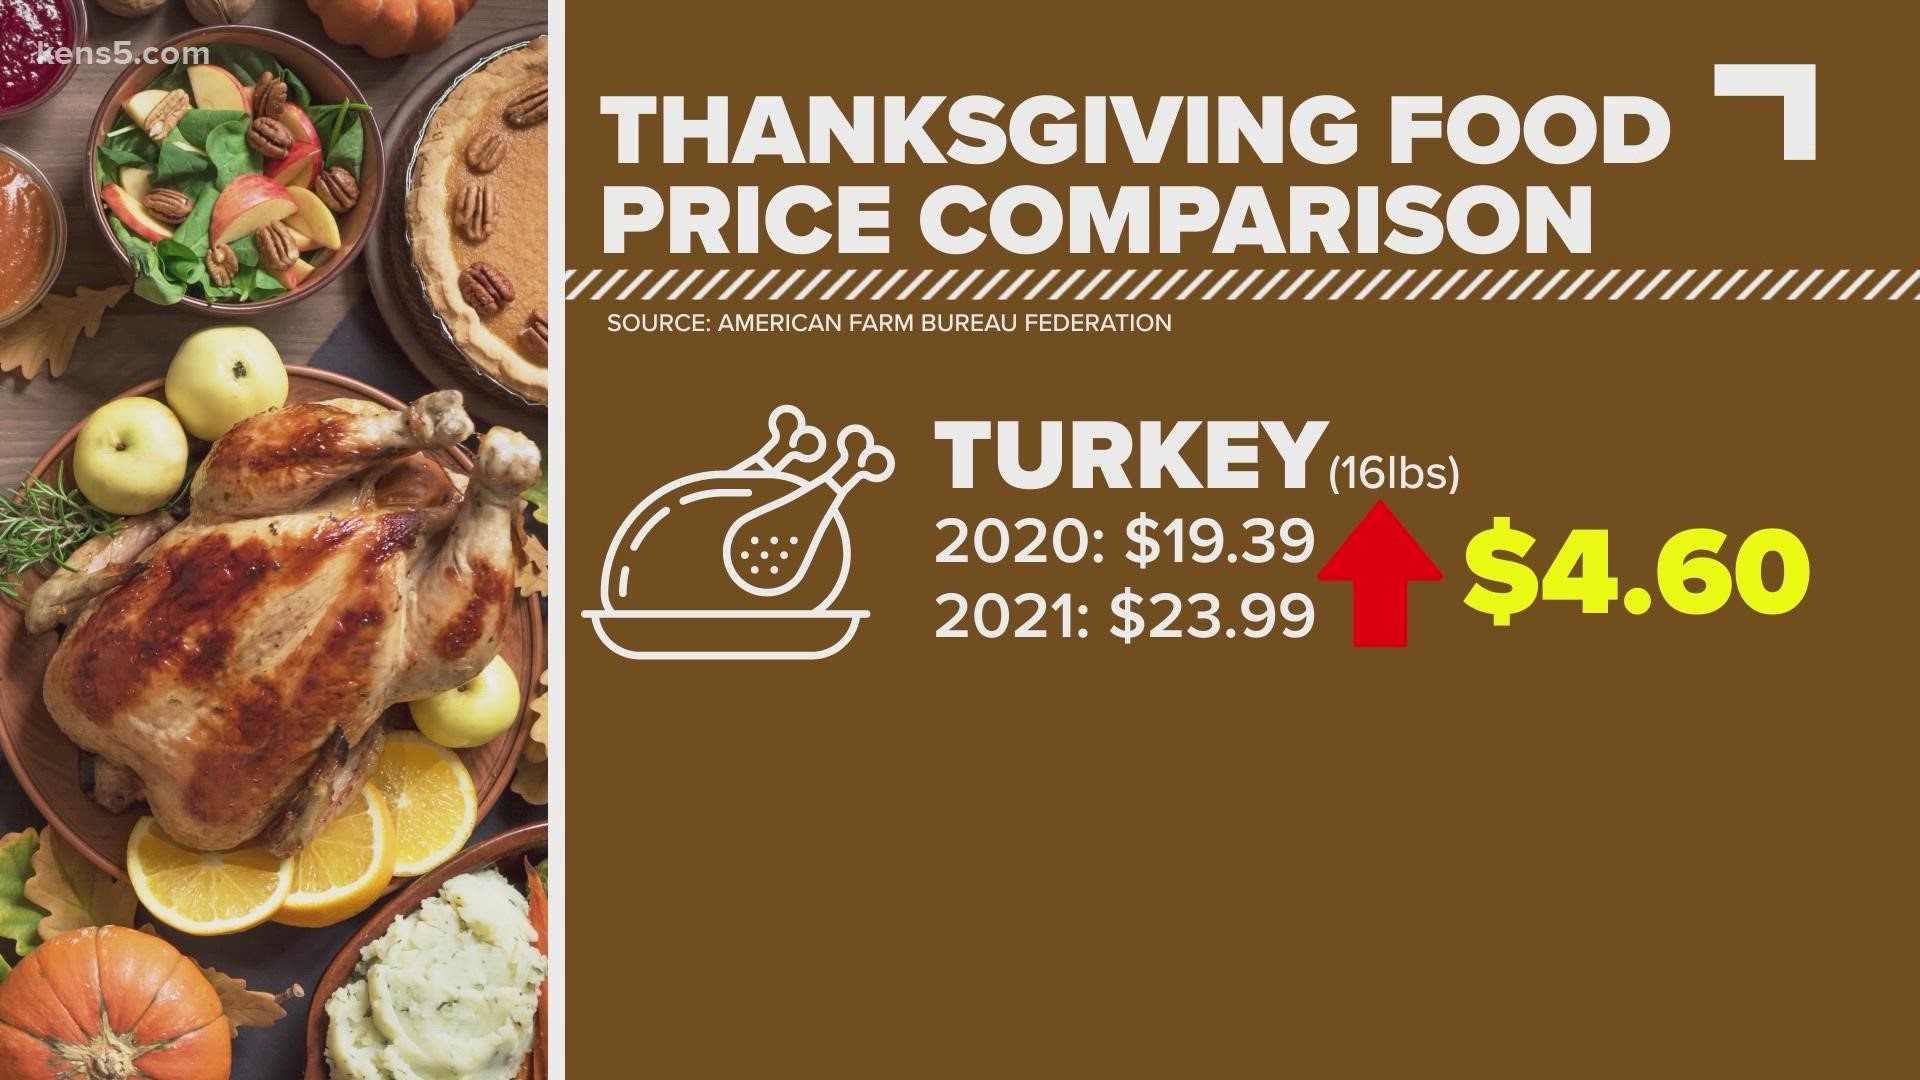 Higher food prices this year are likely to gobble up your budget for Thanksgiving dinner. KENS 5 has super savings tips so you don't have to wing it.